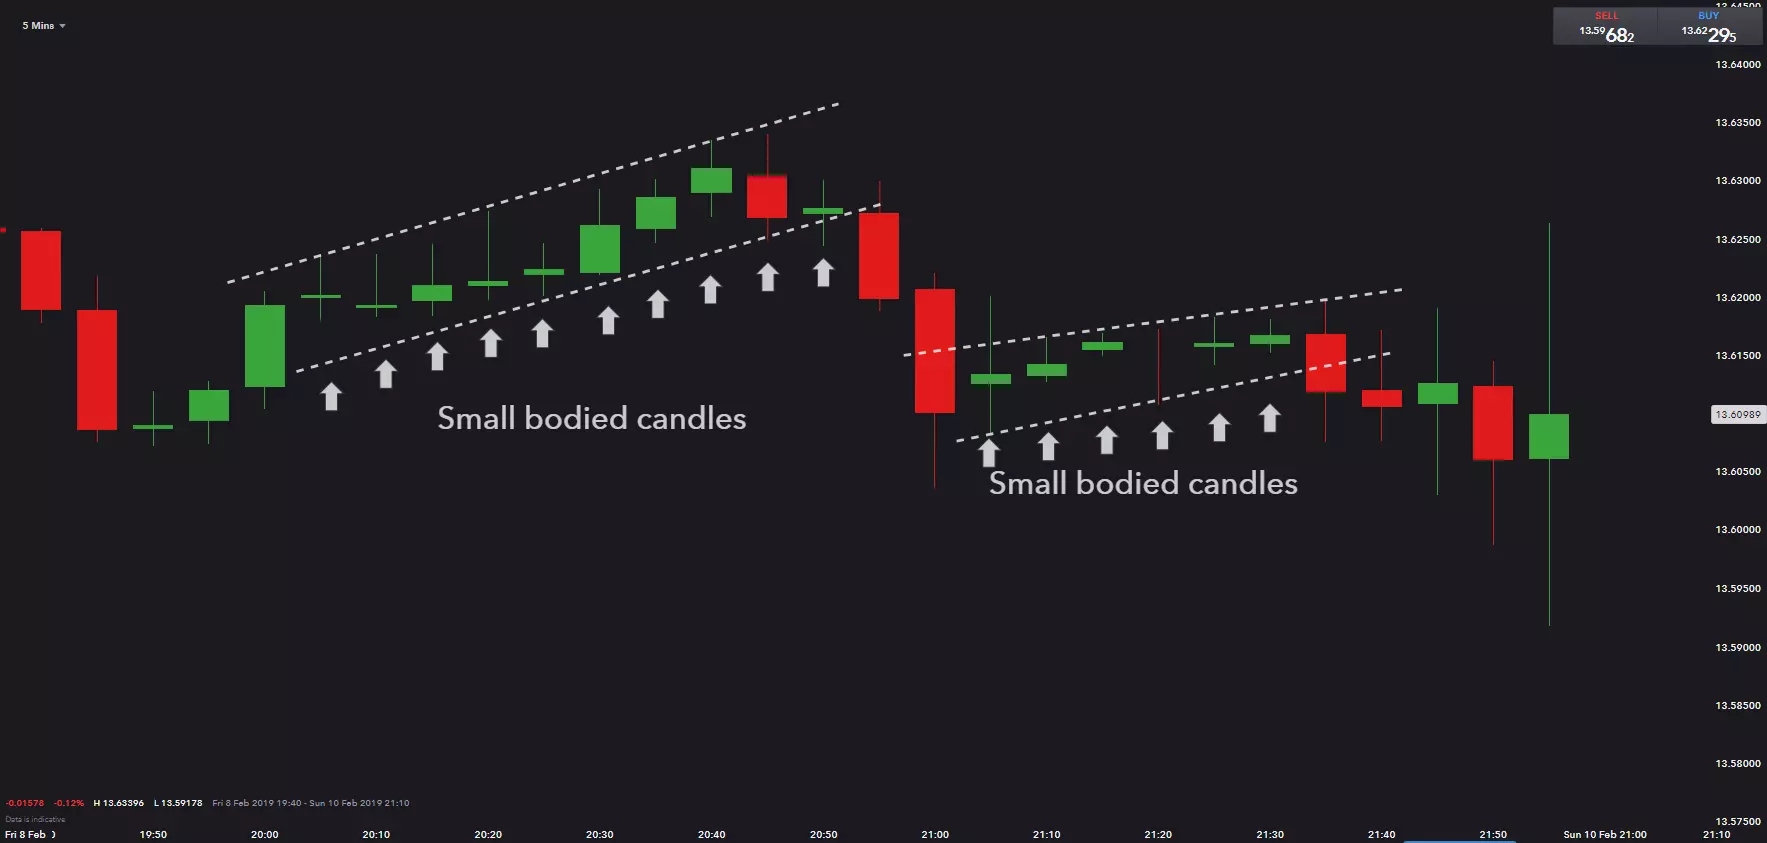 A series of small bodied price candles